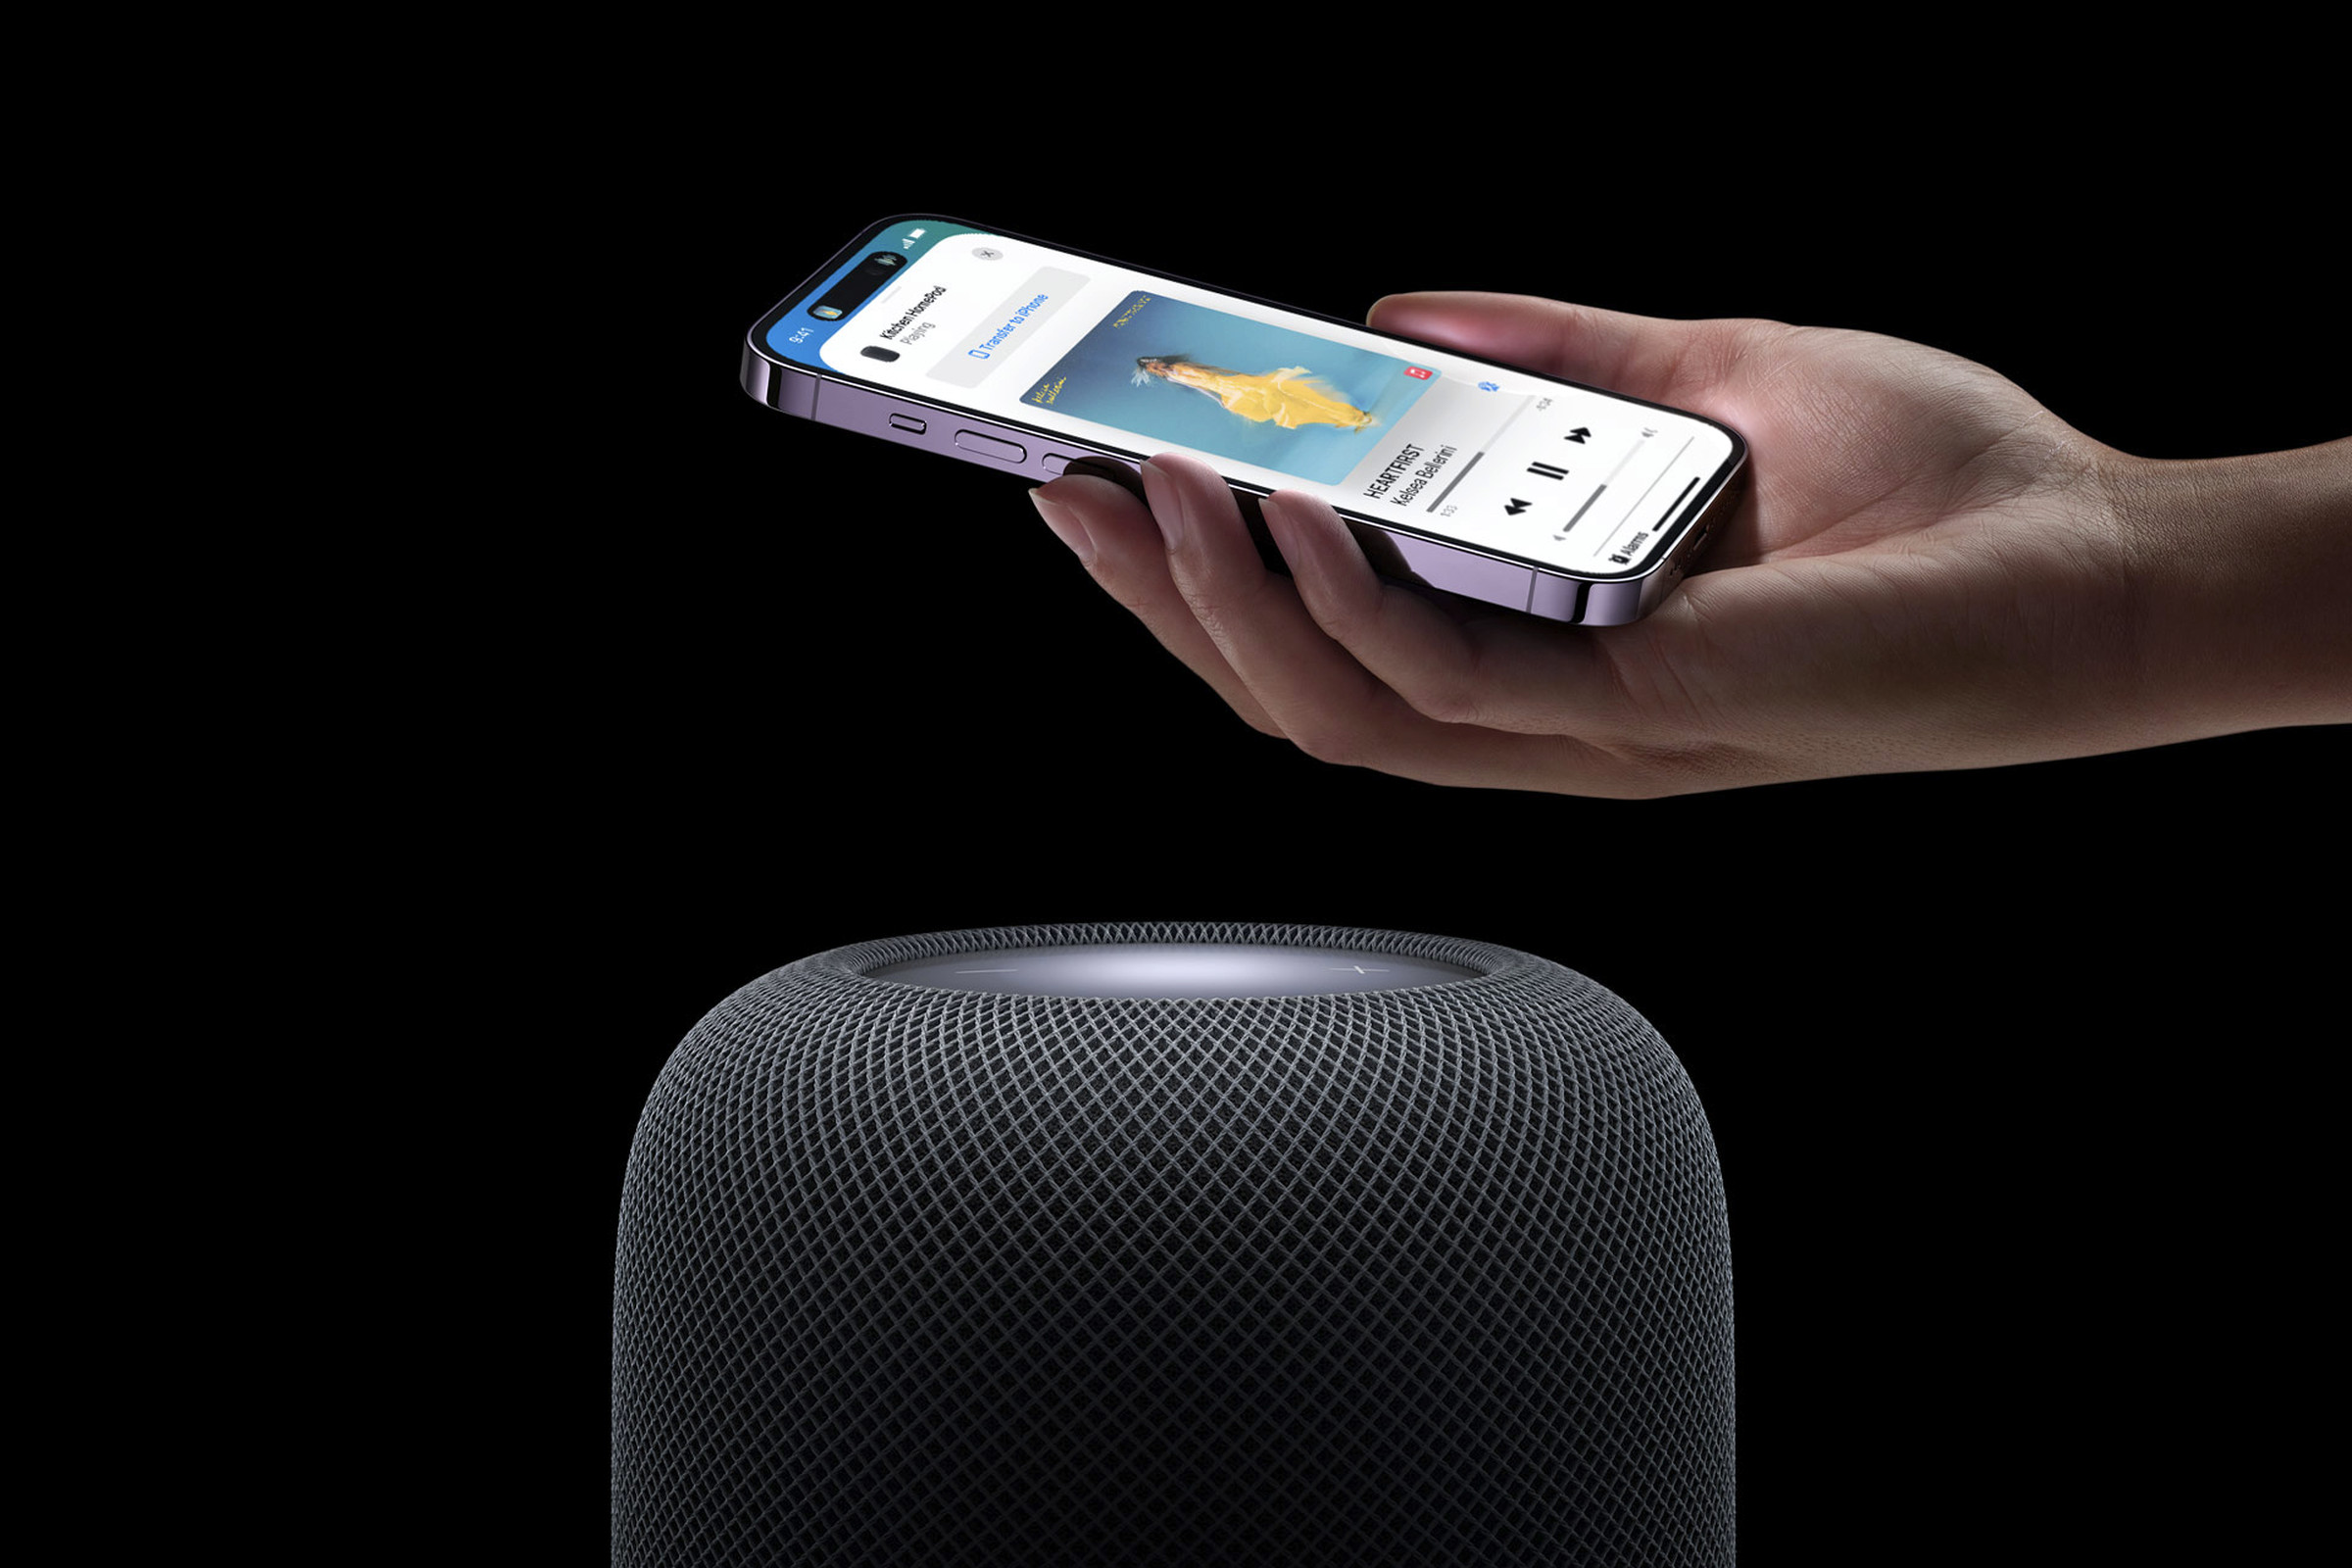 Apple’s new HomePod unsurprisingly sounds close to the original